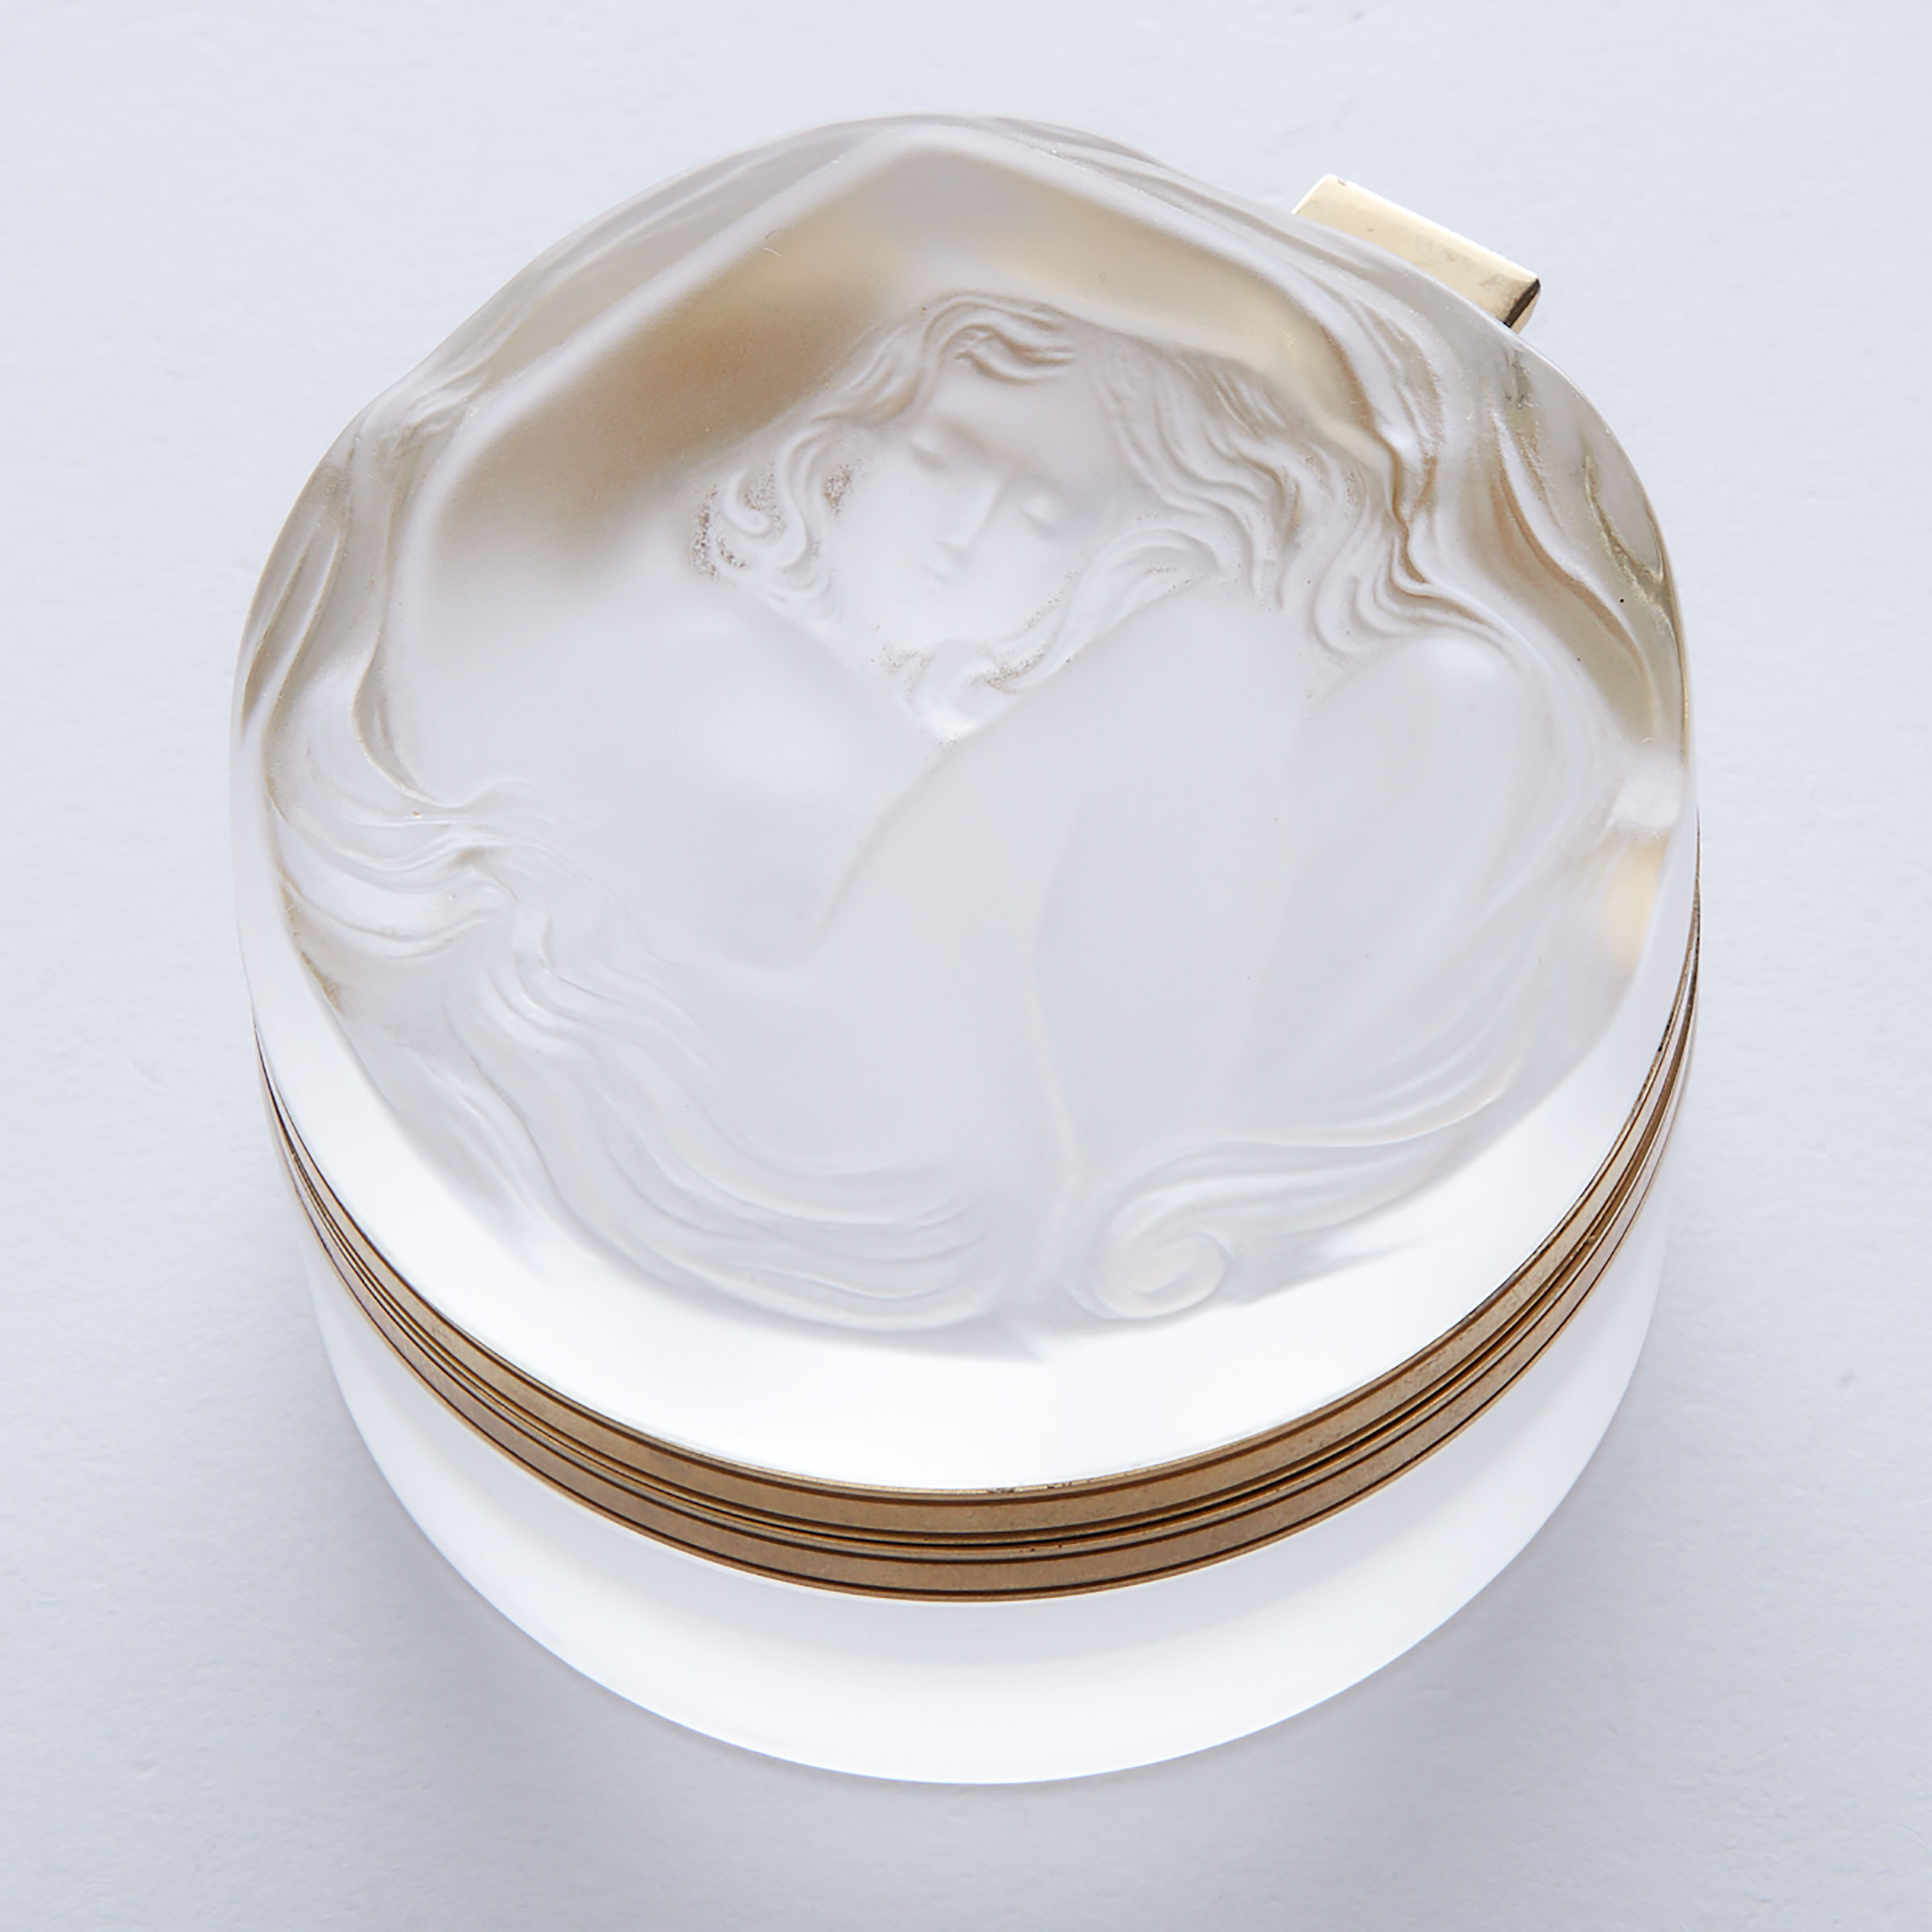 ‘Daphne’, Lalique Moulded and Frosted Glass Box, post-1945